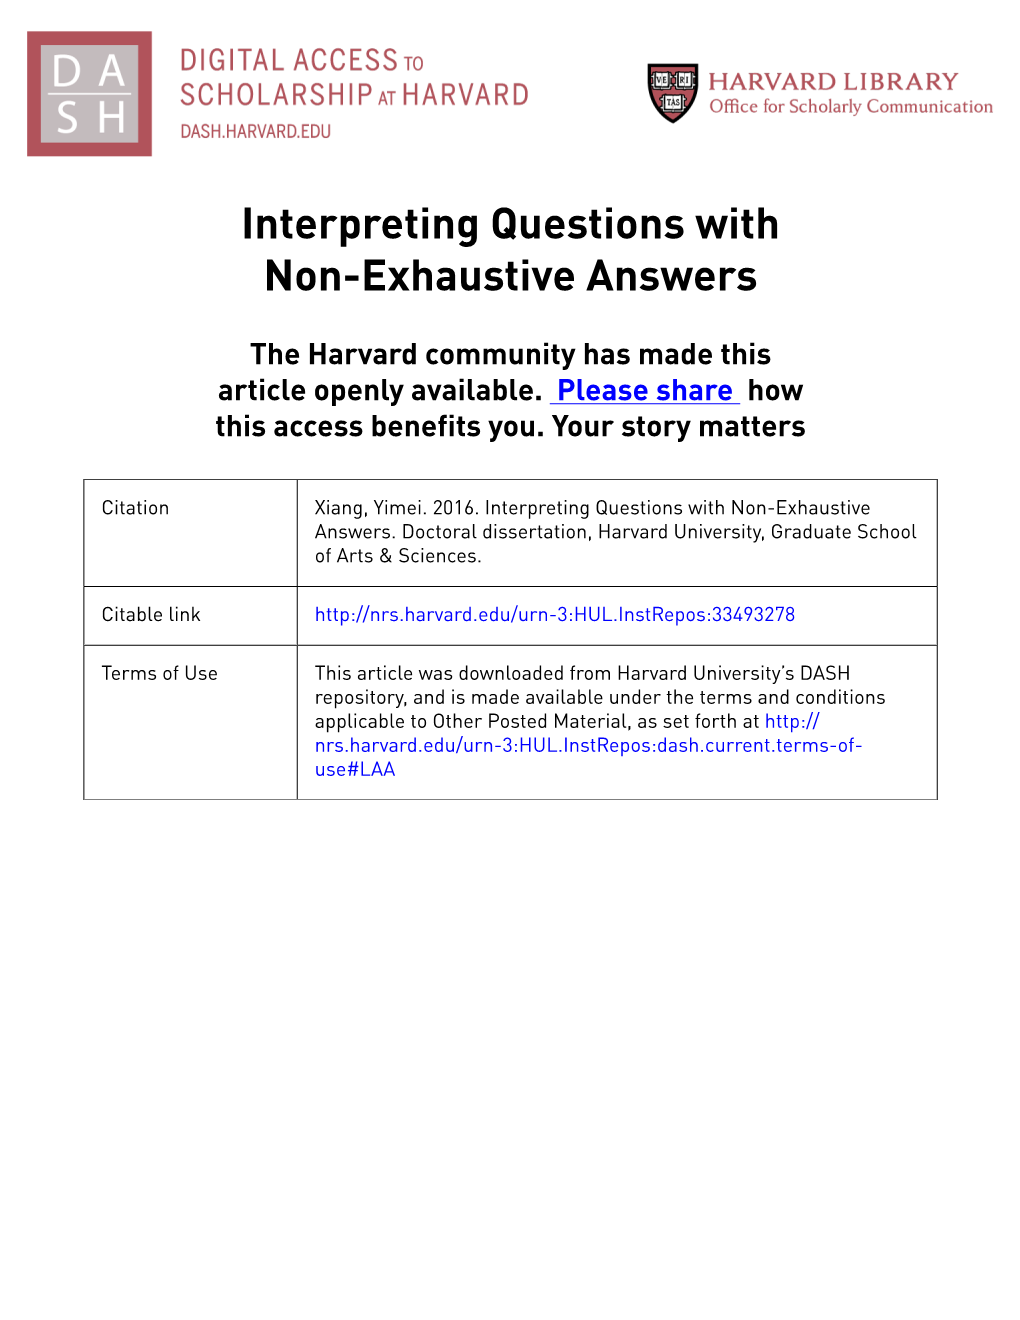 Interpreting Questions with Non-Exhaustive Answers